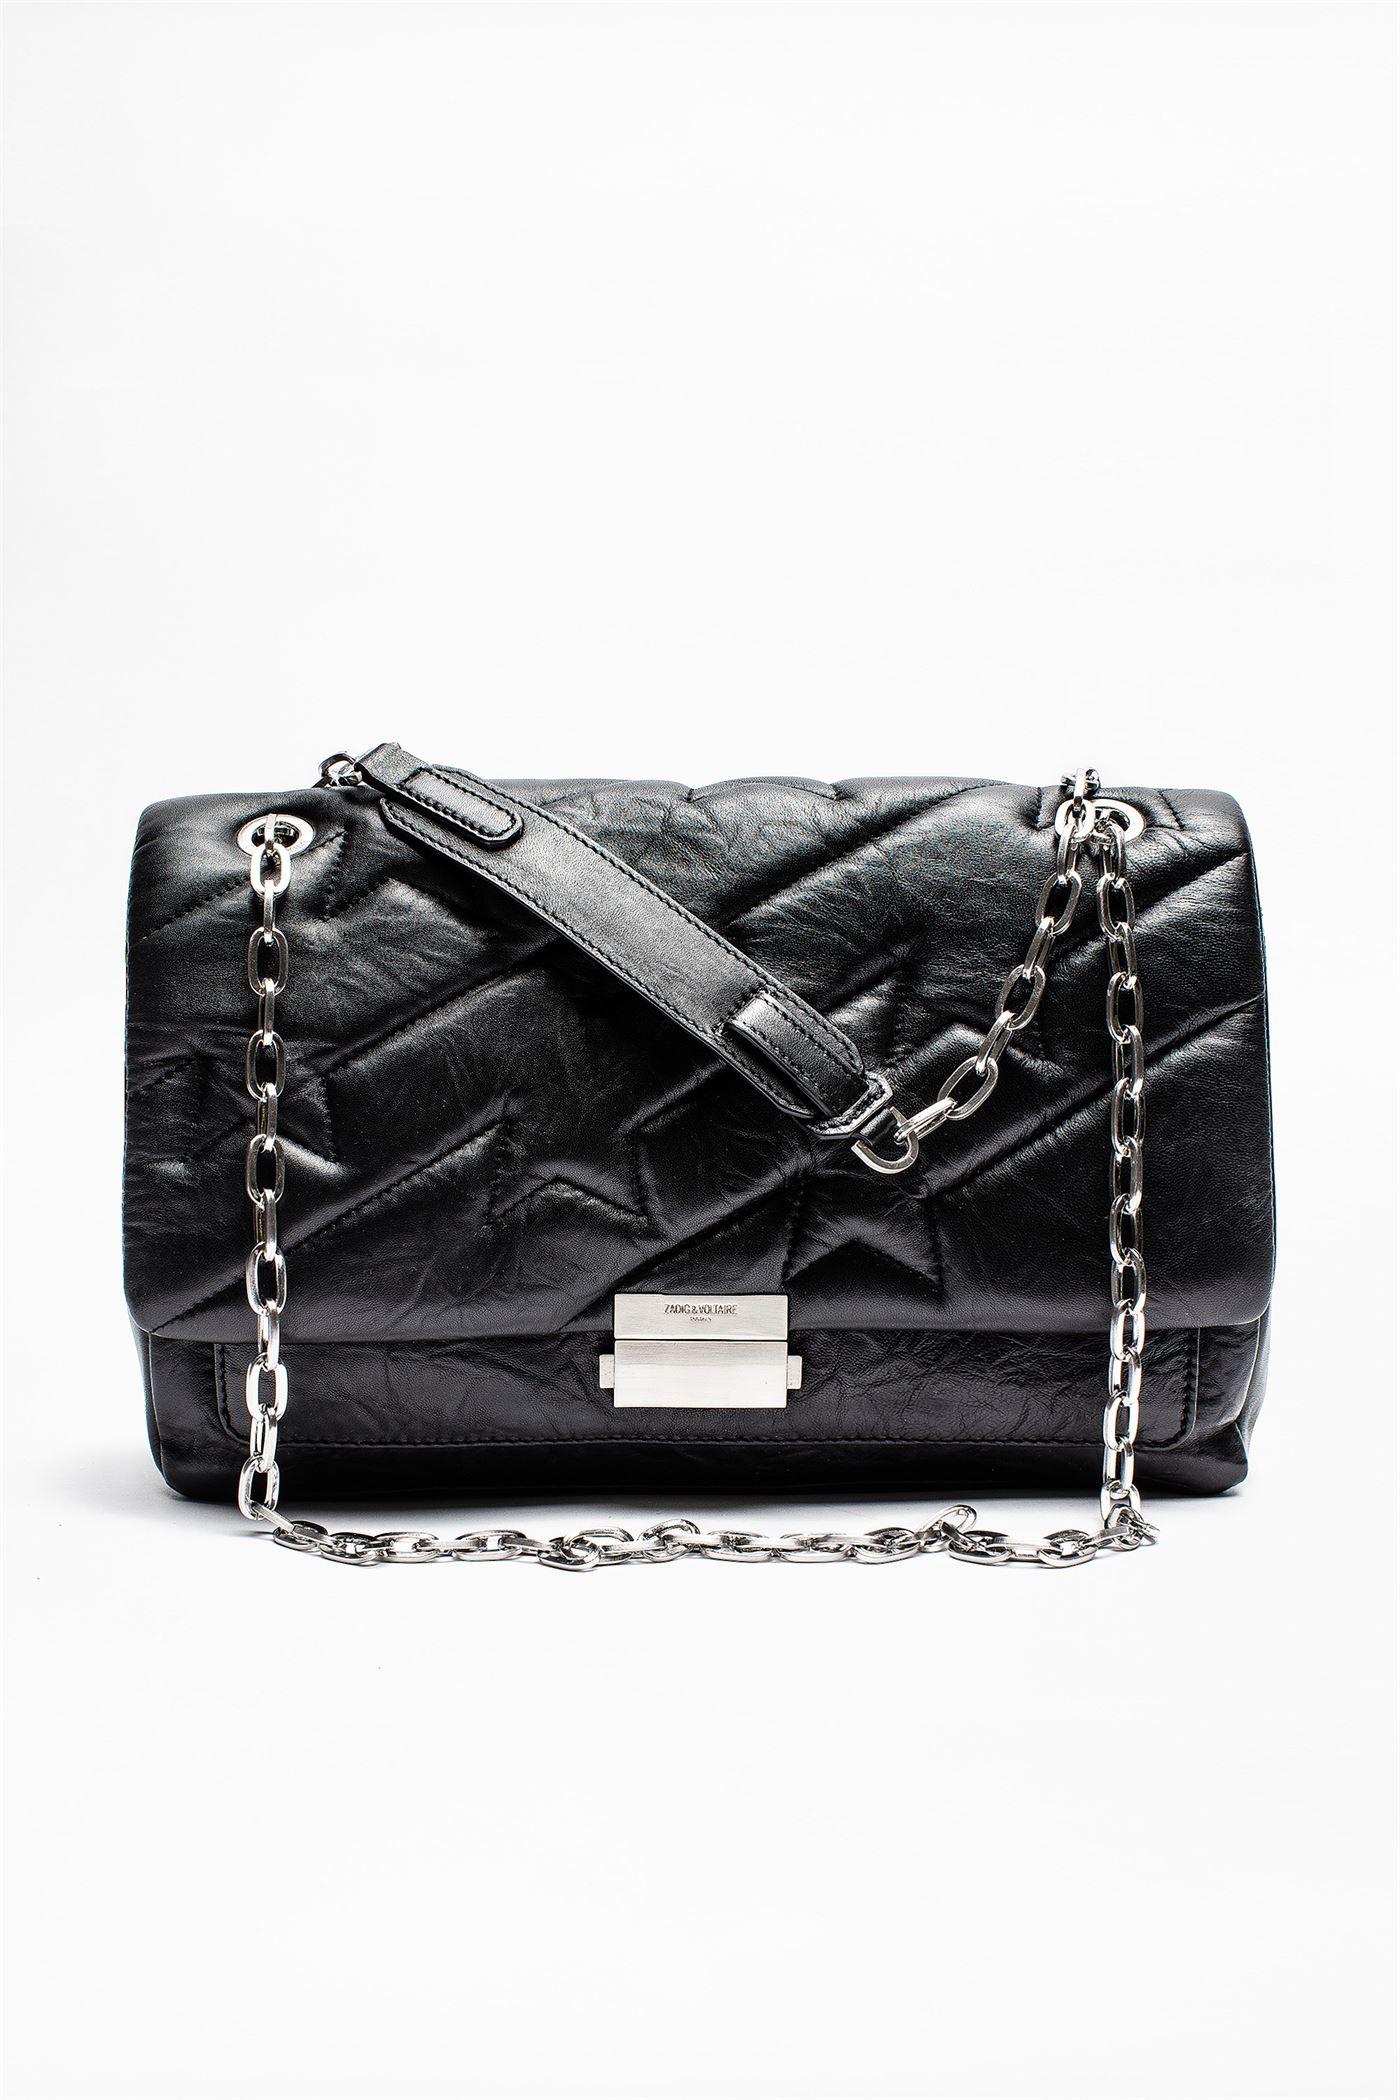 Zadig and voltaire bags - bullgasw